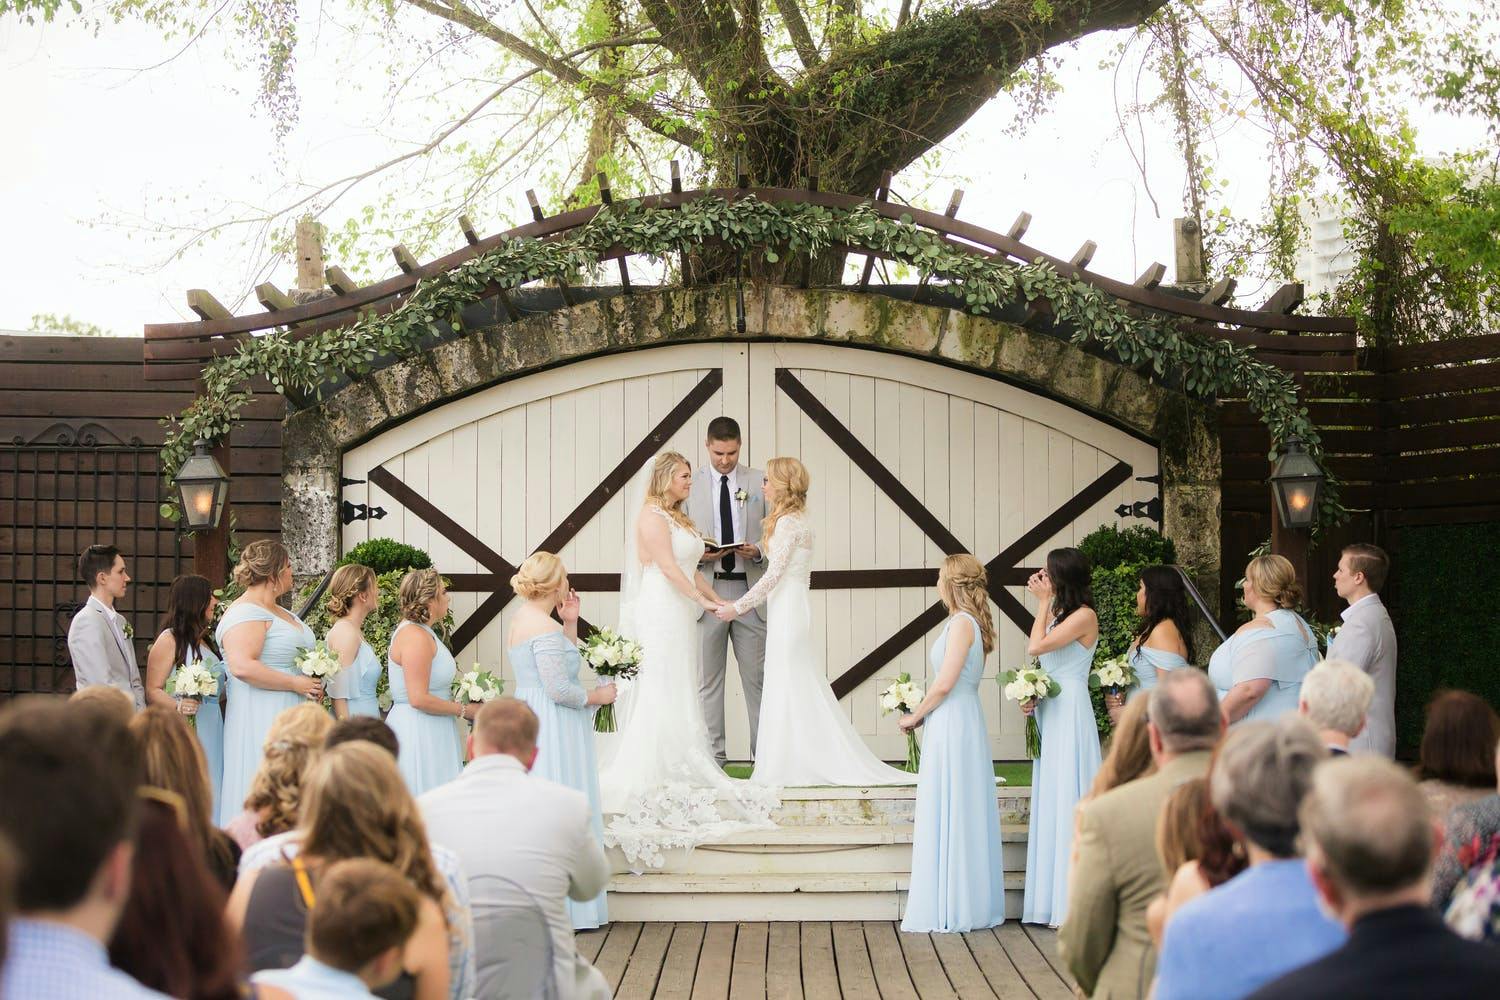 Two Brides Exchange Vows at Hughes Manor in Houston, Texas With Rustic Barn Doors in Backdrop | PartySlate